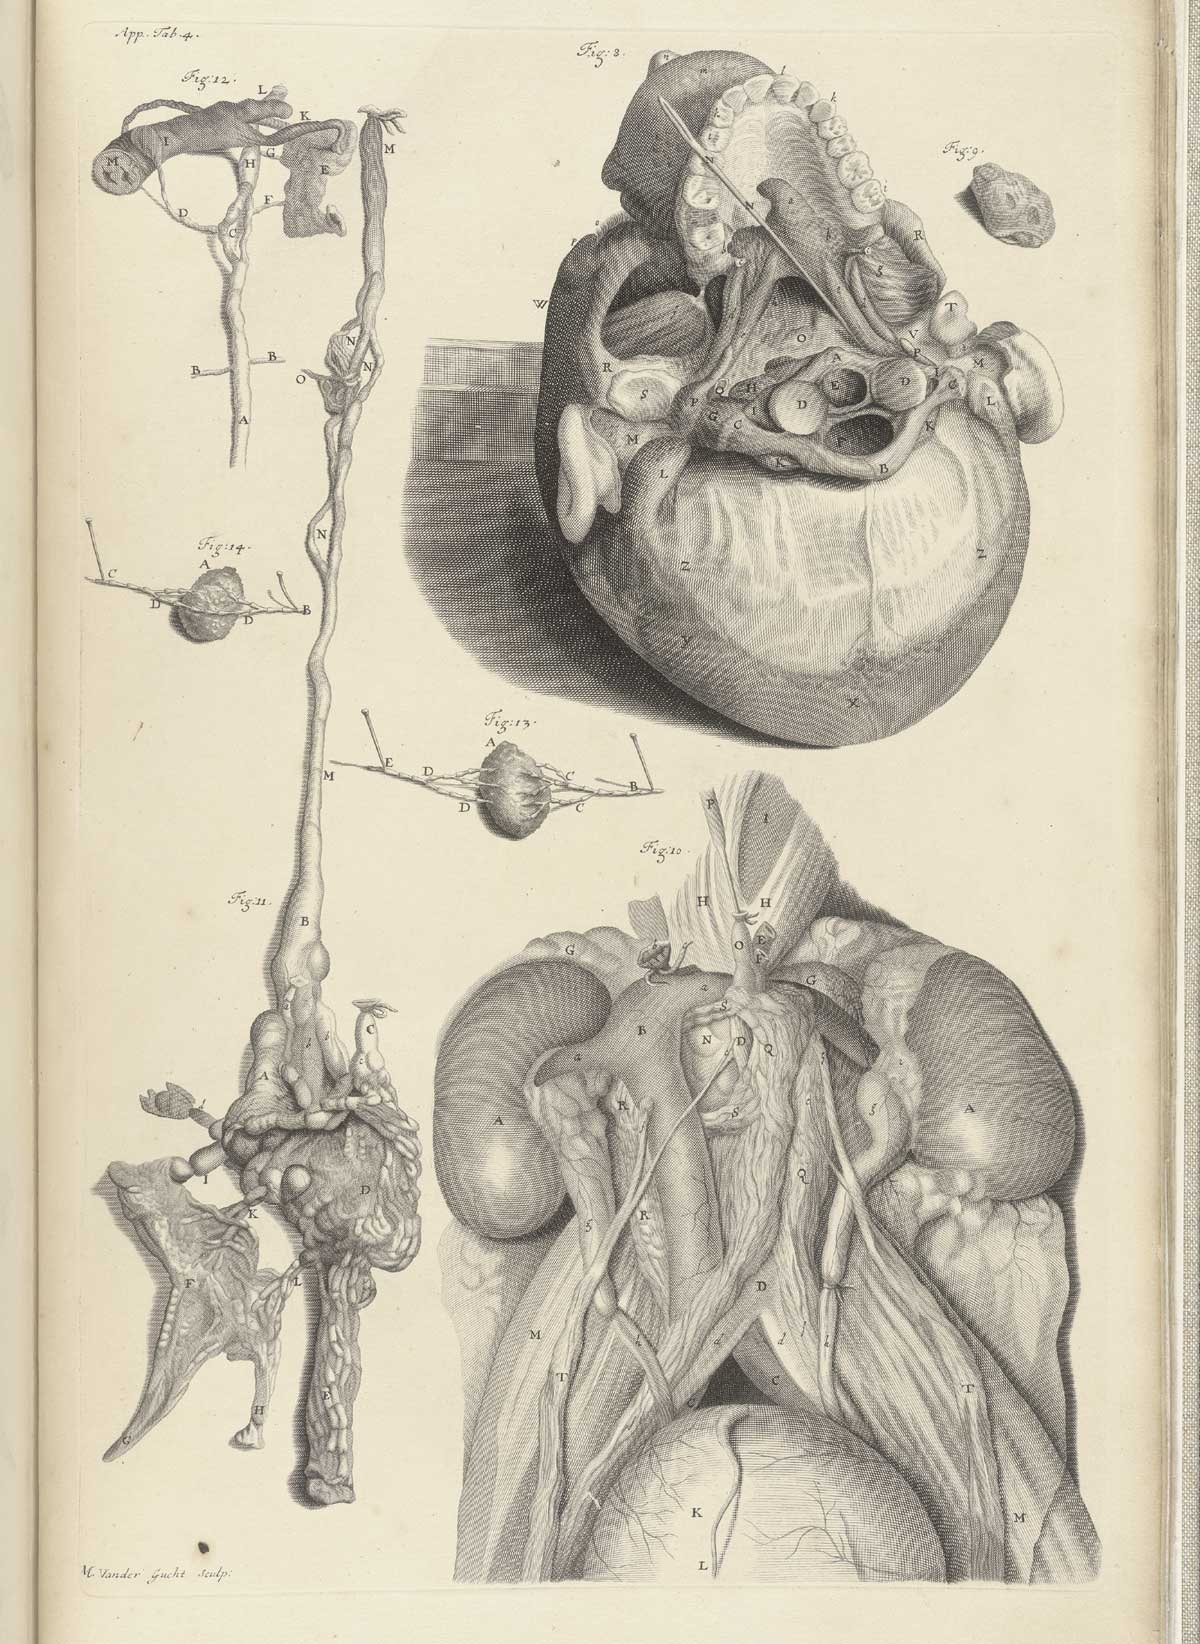 Engraving showing the vascular systems of the bottom of the head and the renal system; at top right is a view of a skull from below showing the entry points of the spinal cord and several arteries and veins as well as the hard palate; at bottom right is pictured the renal system with emphasis on the vascular system; along the left hand side of the page are the thoracic ducts which move chyle from the liver to the digestive system and some lymph nodes on either side; from William Cowper’s Anatomy of the humane bodies, NLM Call no.: WZ 250 C876a 1698.